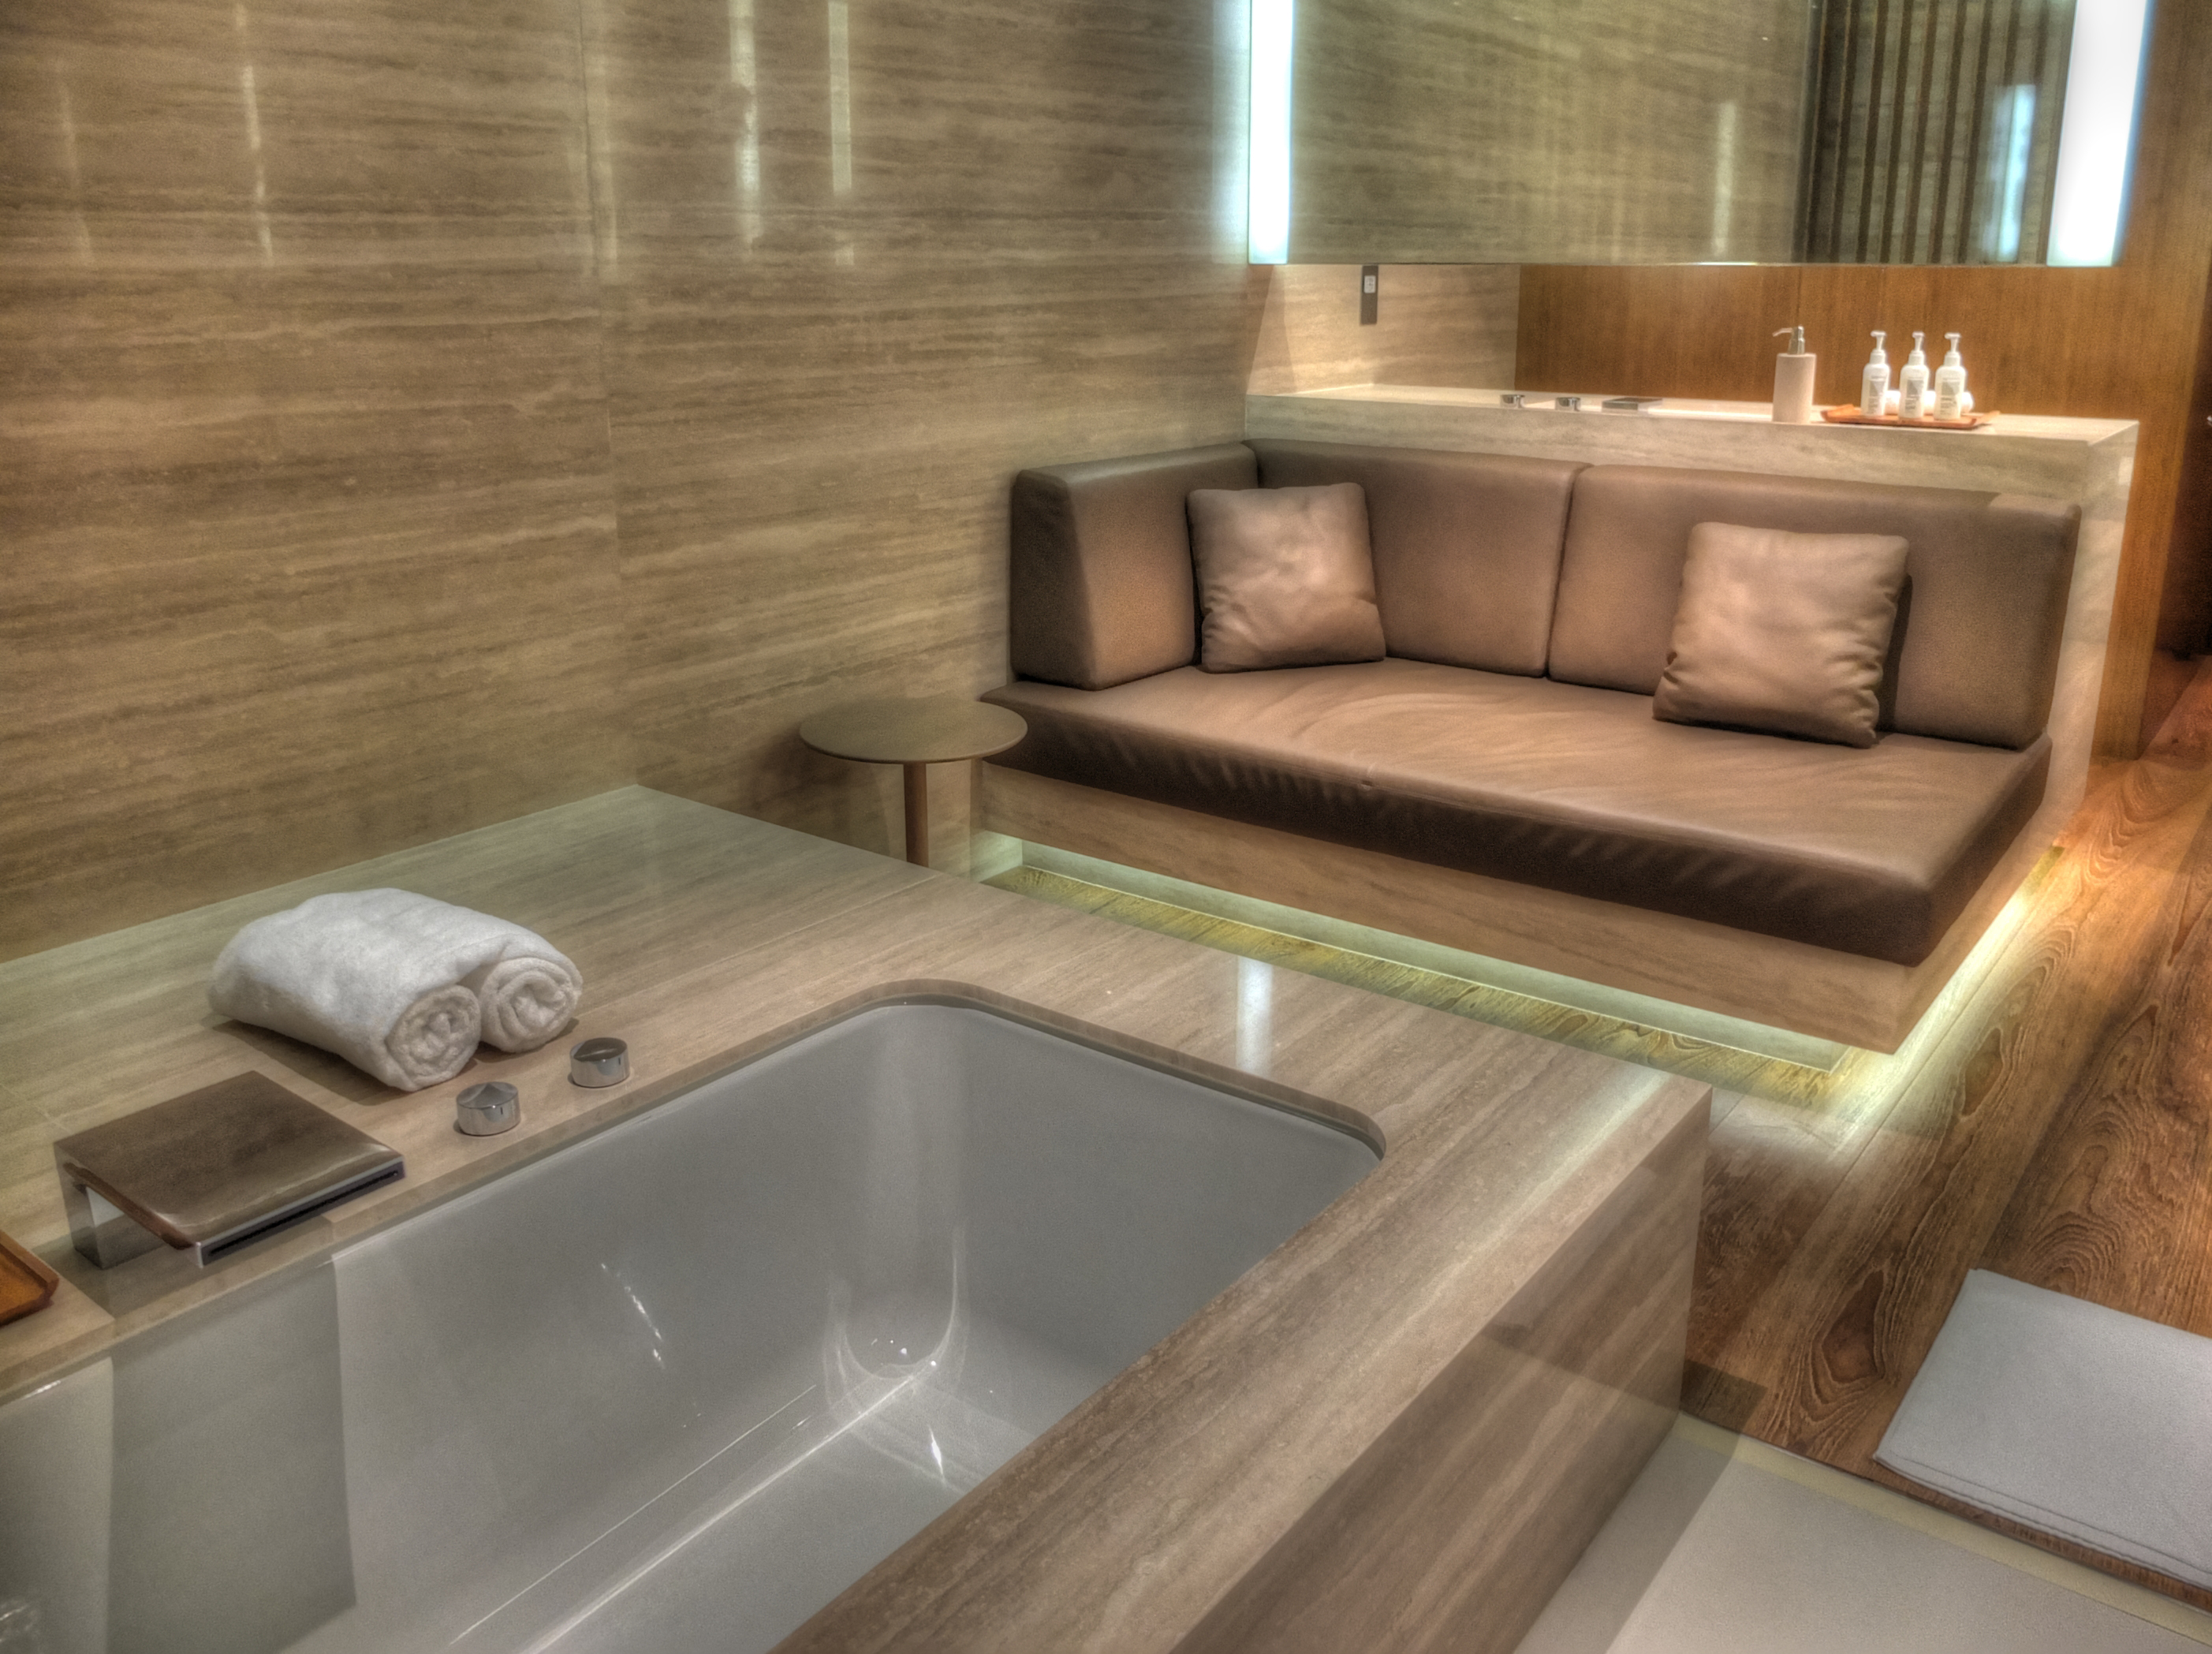 a bathroom with a couch and bathtub